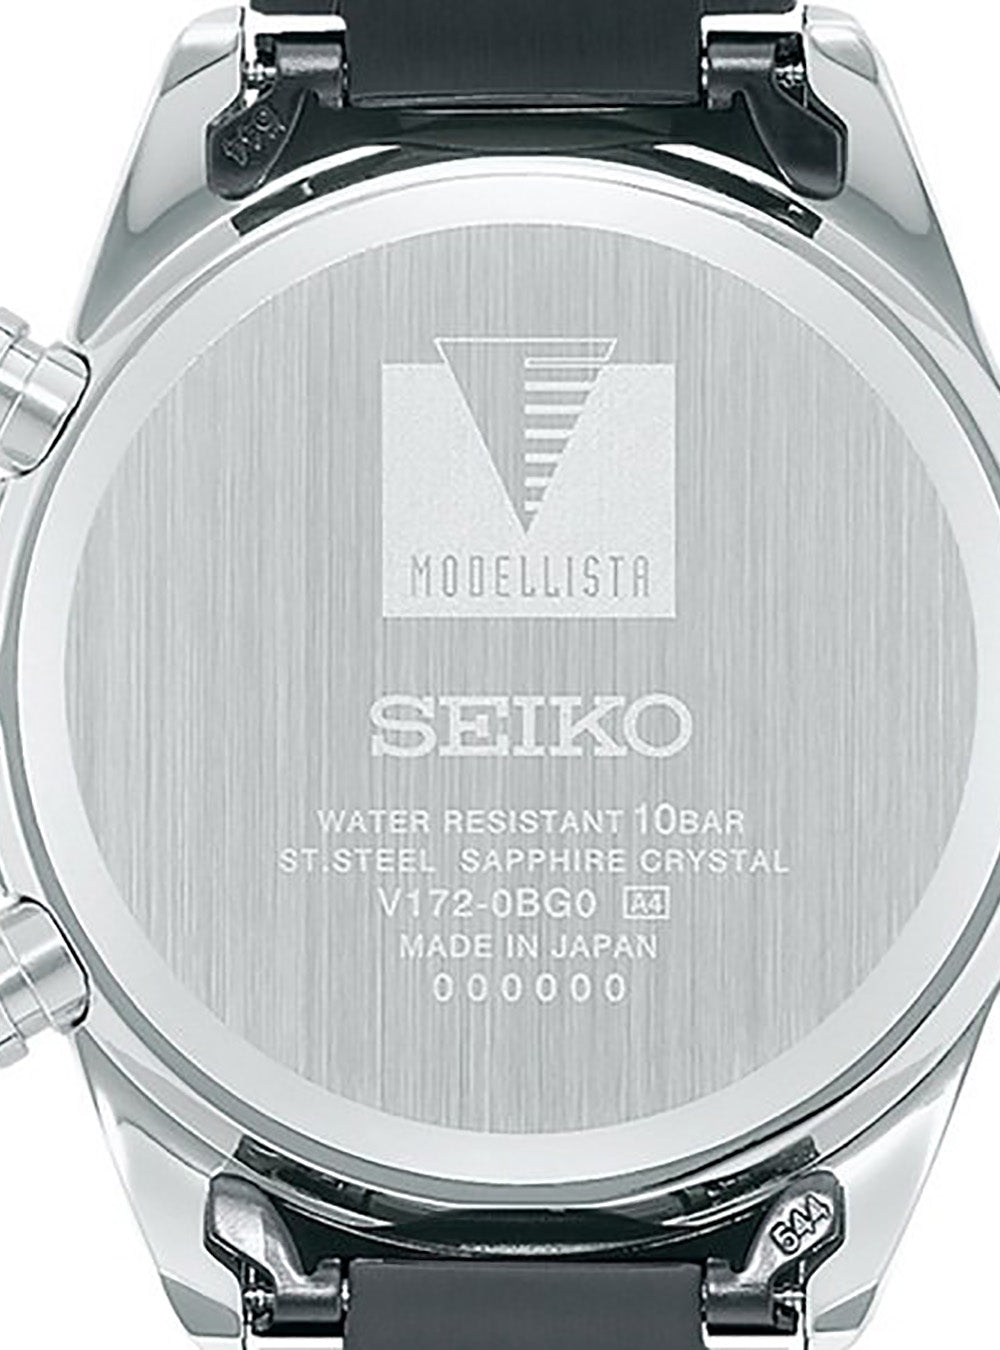 SEIKO SELECTION MODELLISTA SPECIAL EDITION SBPY173 MADE IN JAPAN JDM –  japan-select